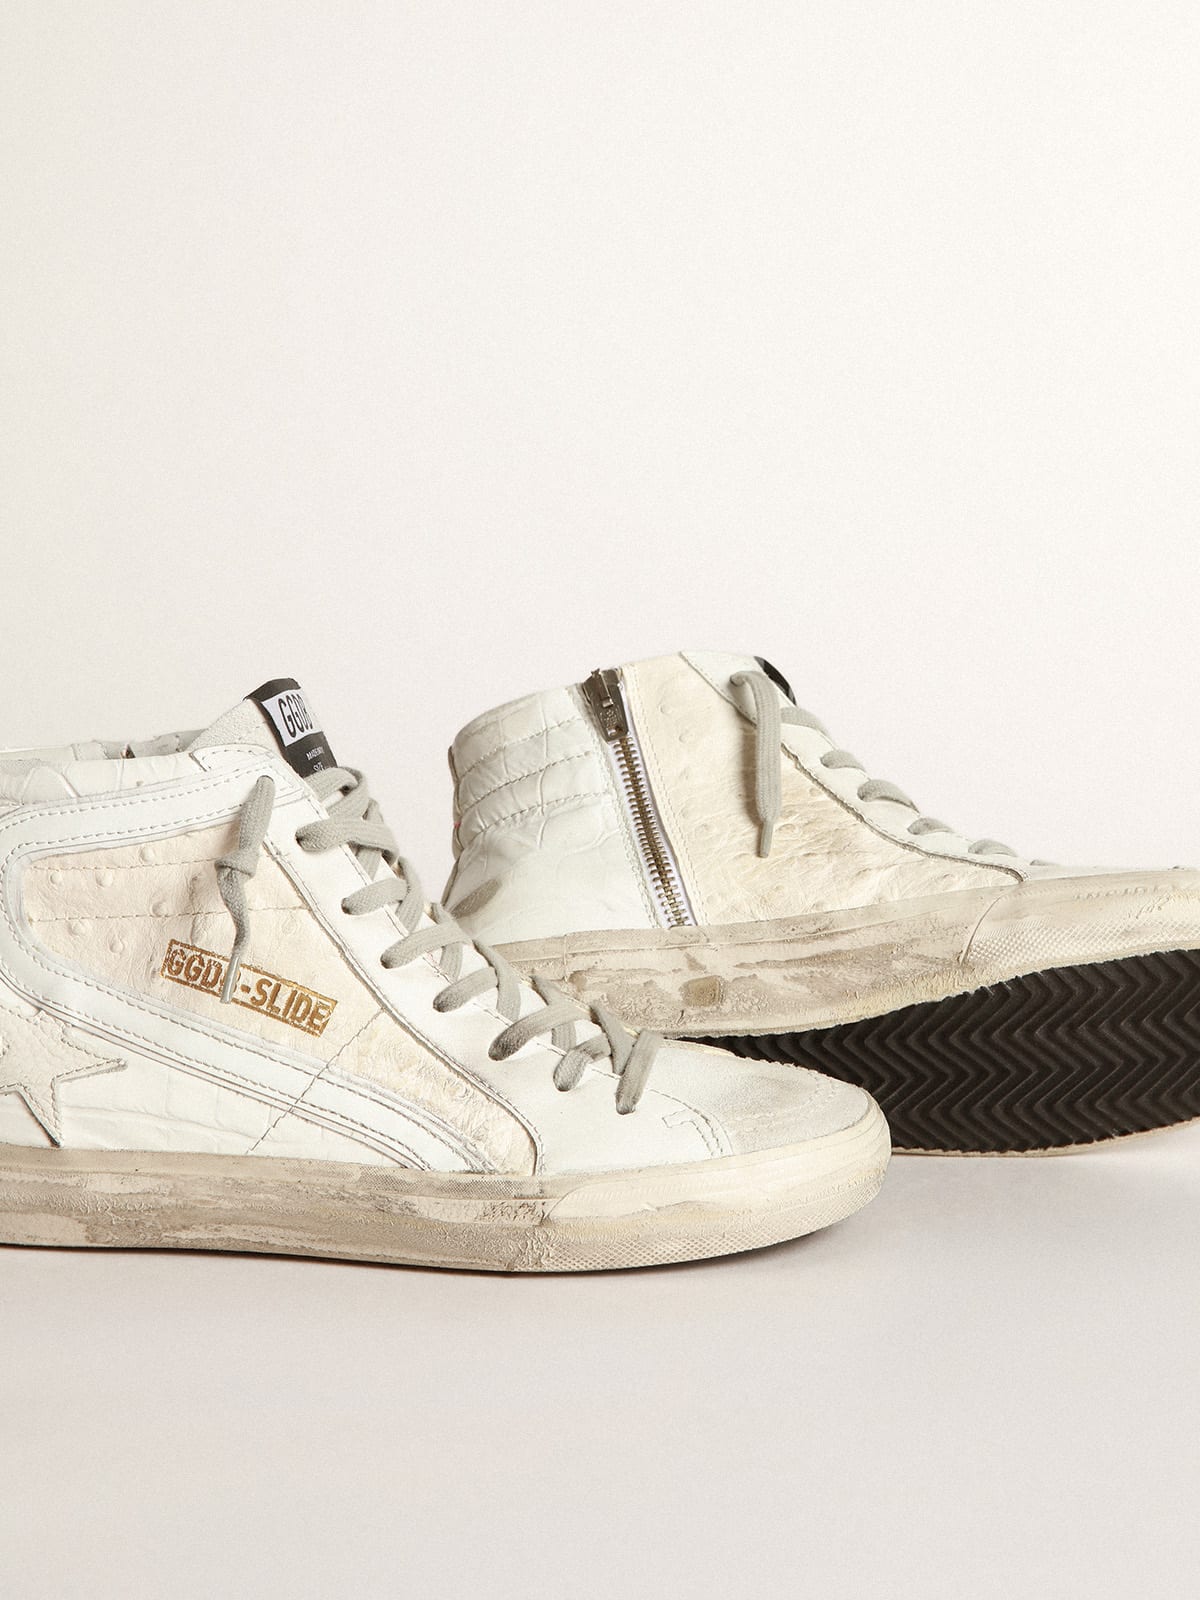 Golden Goose - White patchwork shades Slide sneakers in 